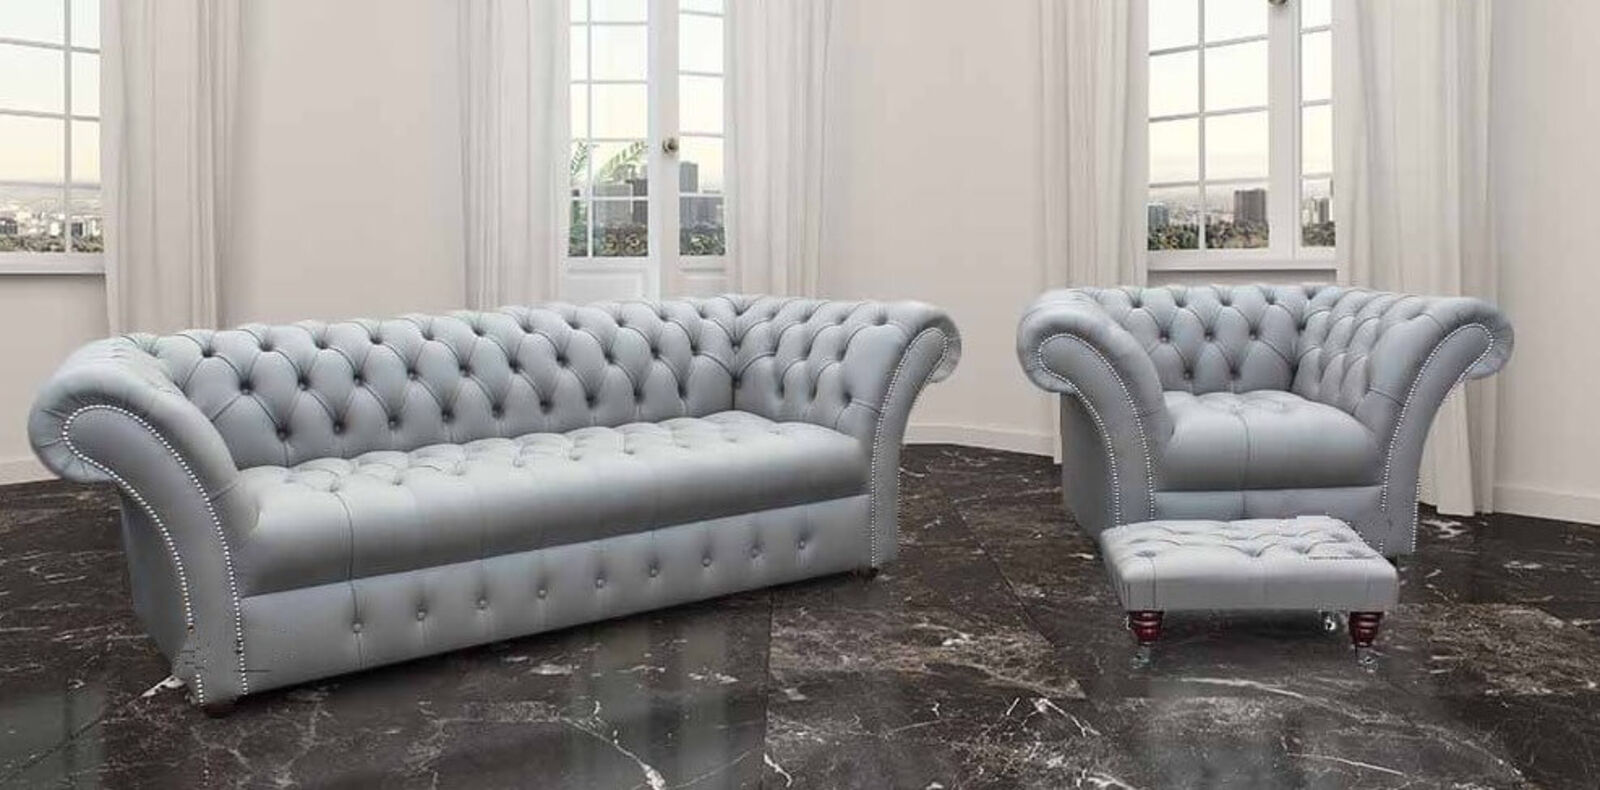 Product photograph of Shelly Silver Birch Leather Chesterfield Grosvenor 3 Seater Armchair Footstool Sofa Settee Buttoned Seat Designersofas4u from Designer Sofas 4U